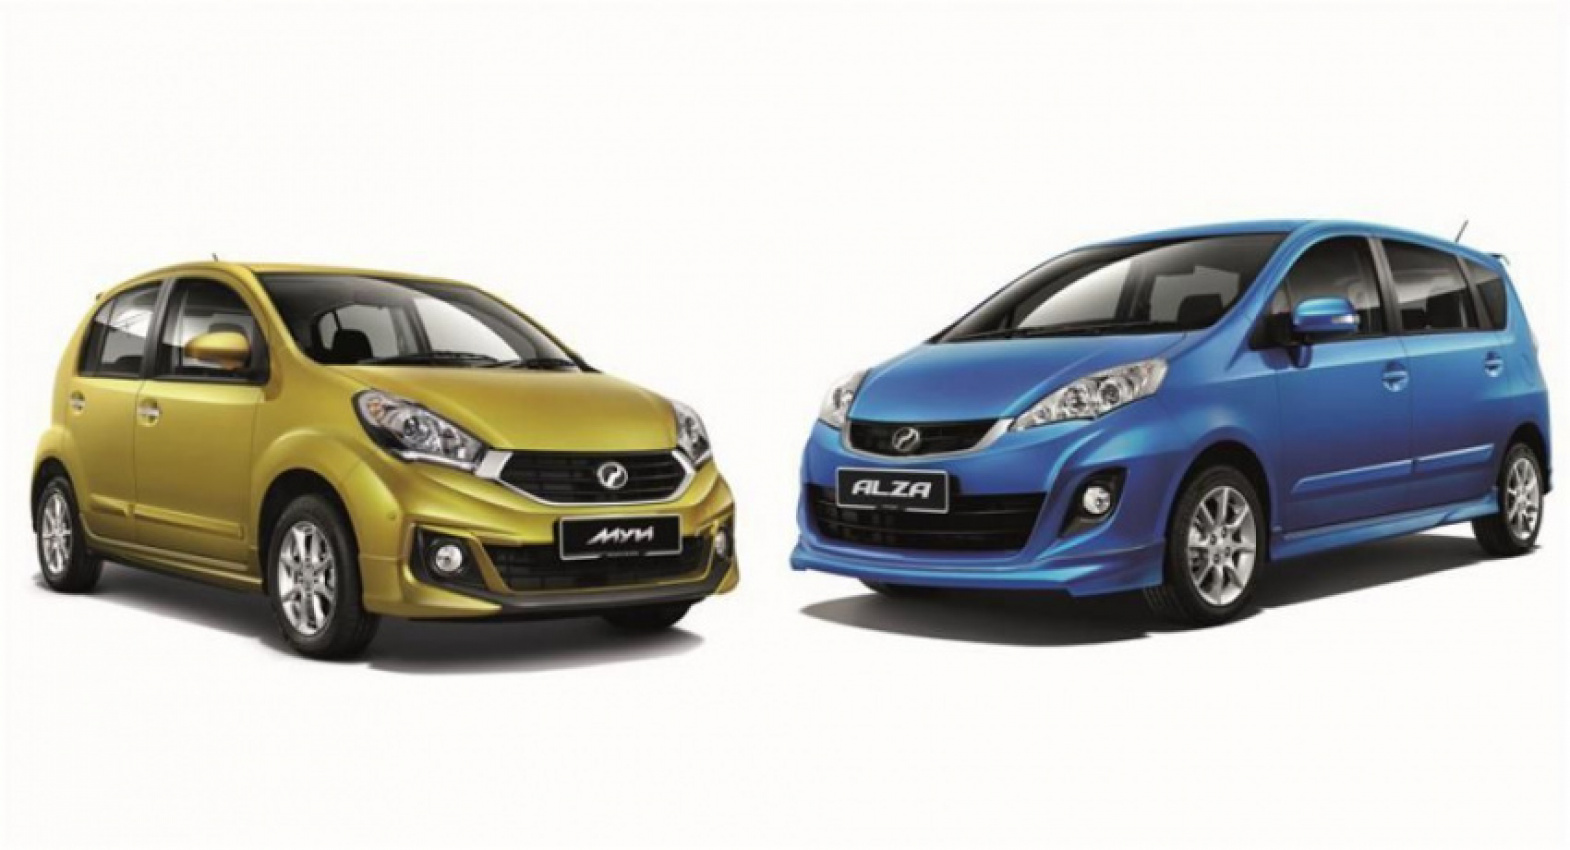 autos, cars, alza, auto news, bezza, grab, myvi, perodua, perodua alza, perodua bezza, perodua myvi, perodua to offer special price and interest rates for grab drivers